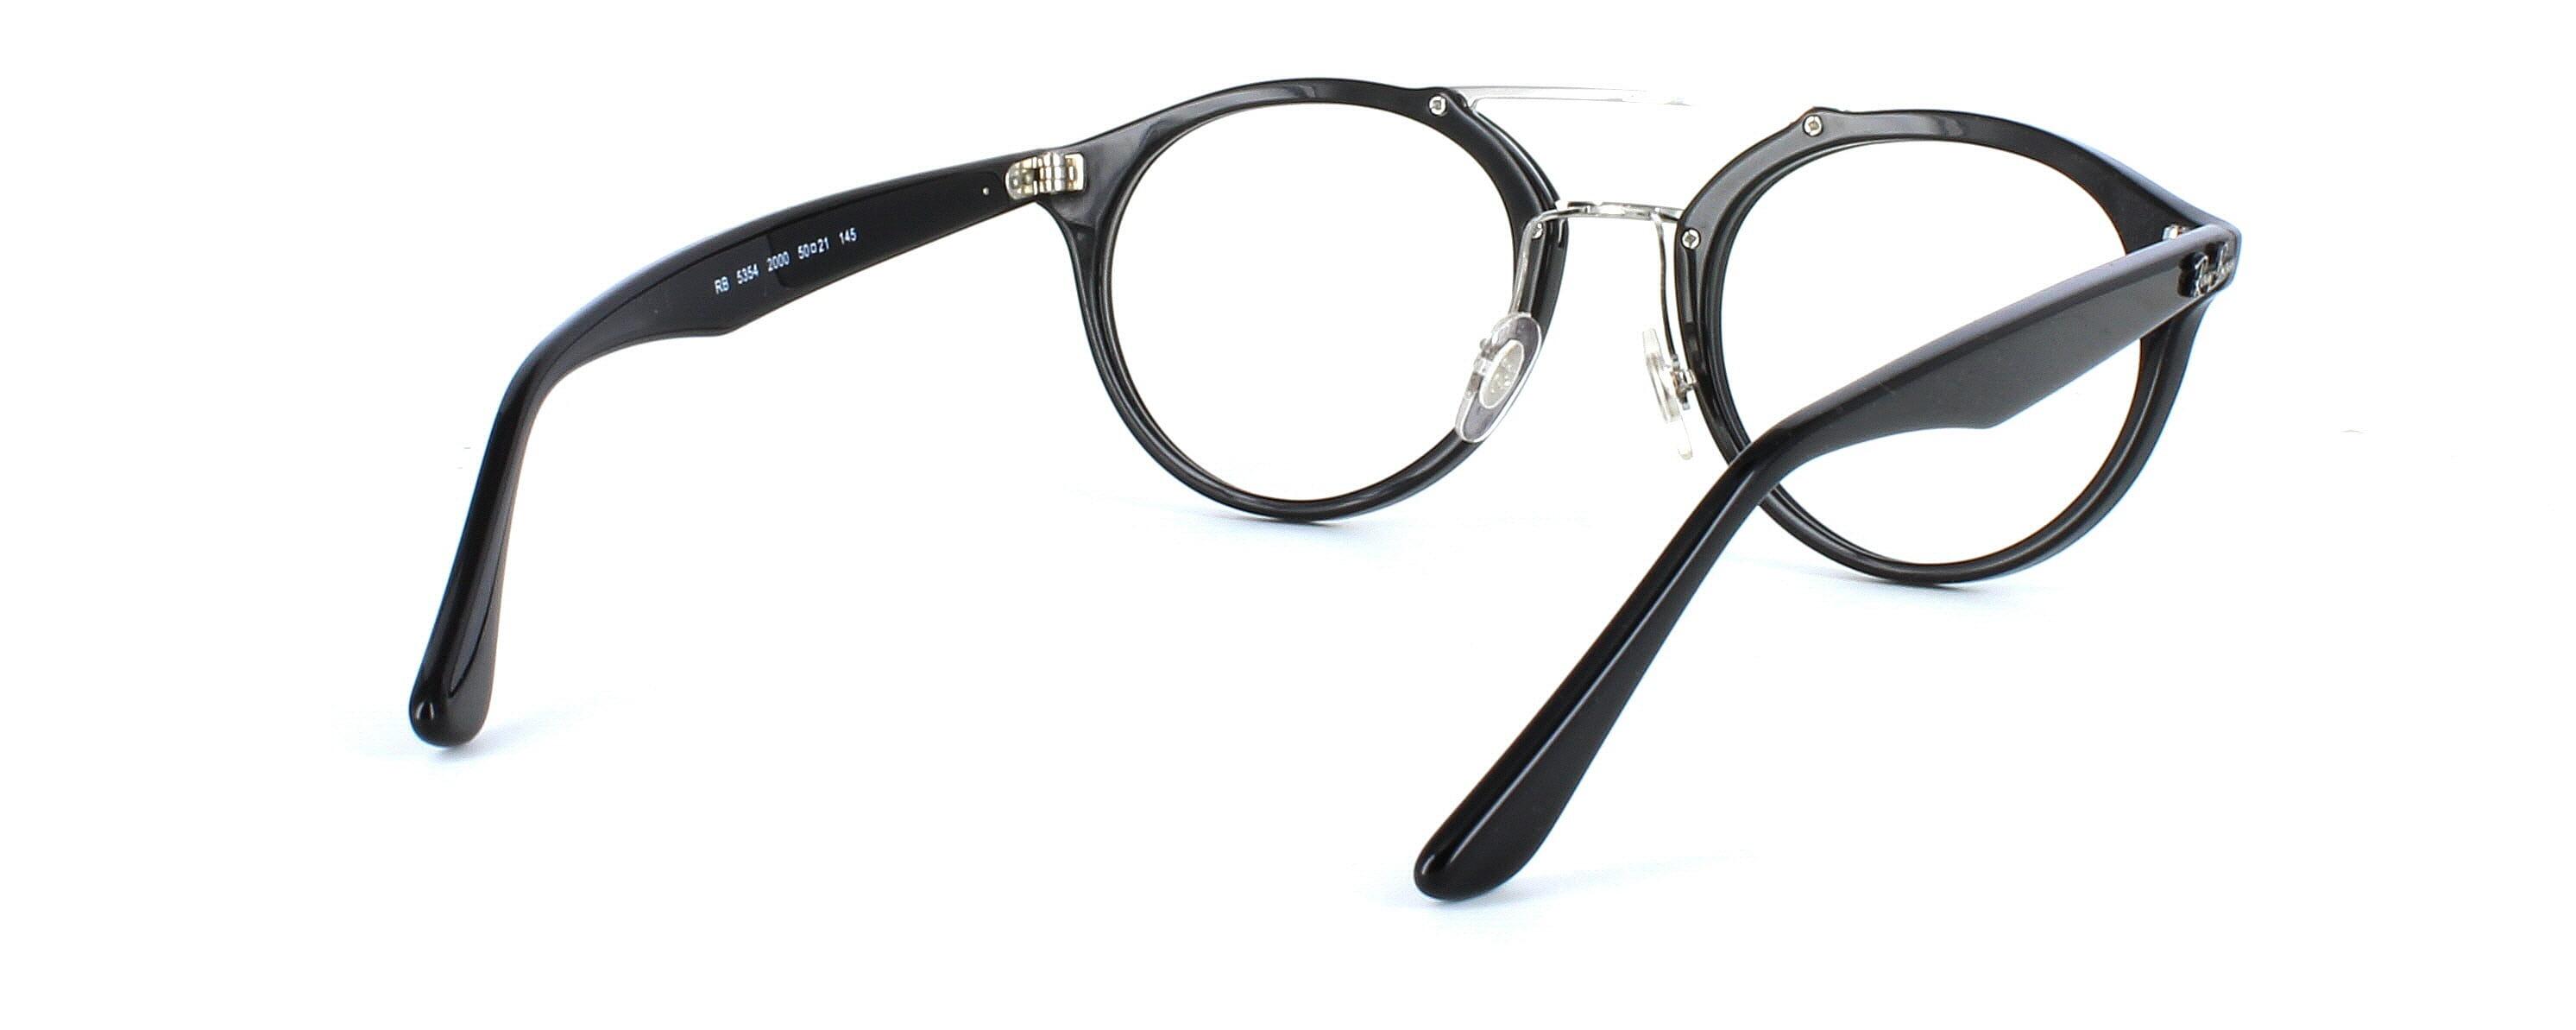 Ray Ban 5347 - Ladies acetate & metal combination frame. Black face & arms with double metal nose bridge in silver - image view 5